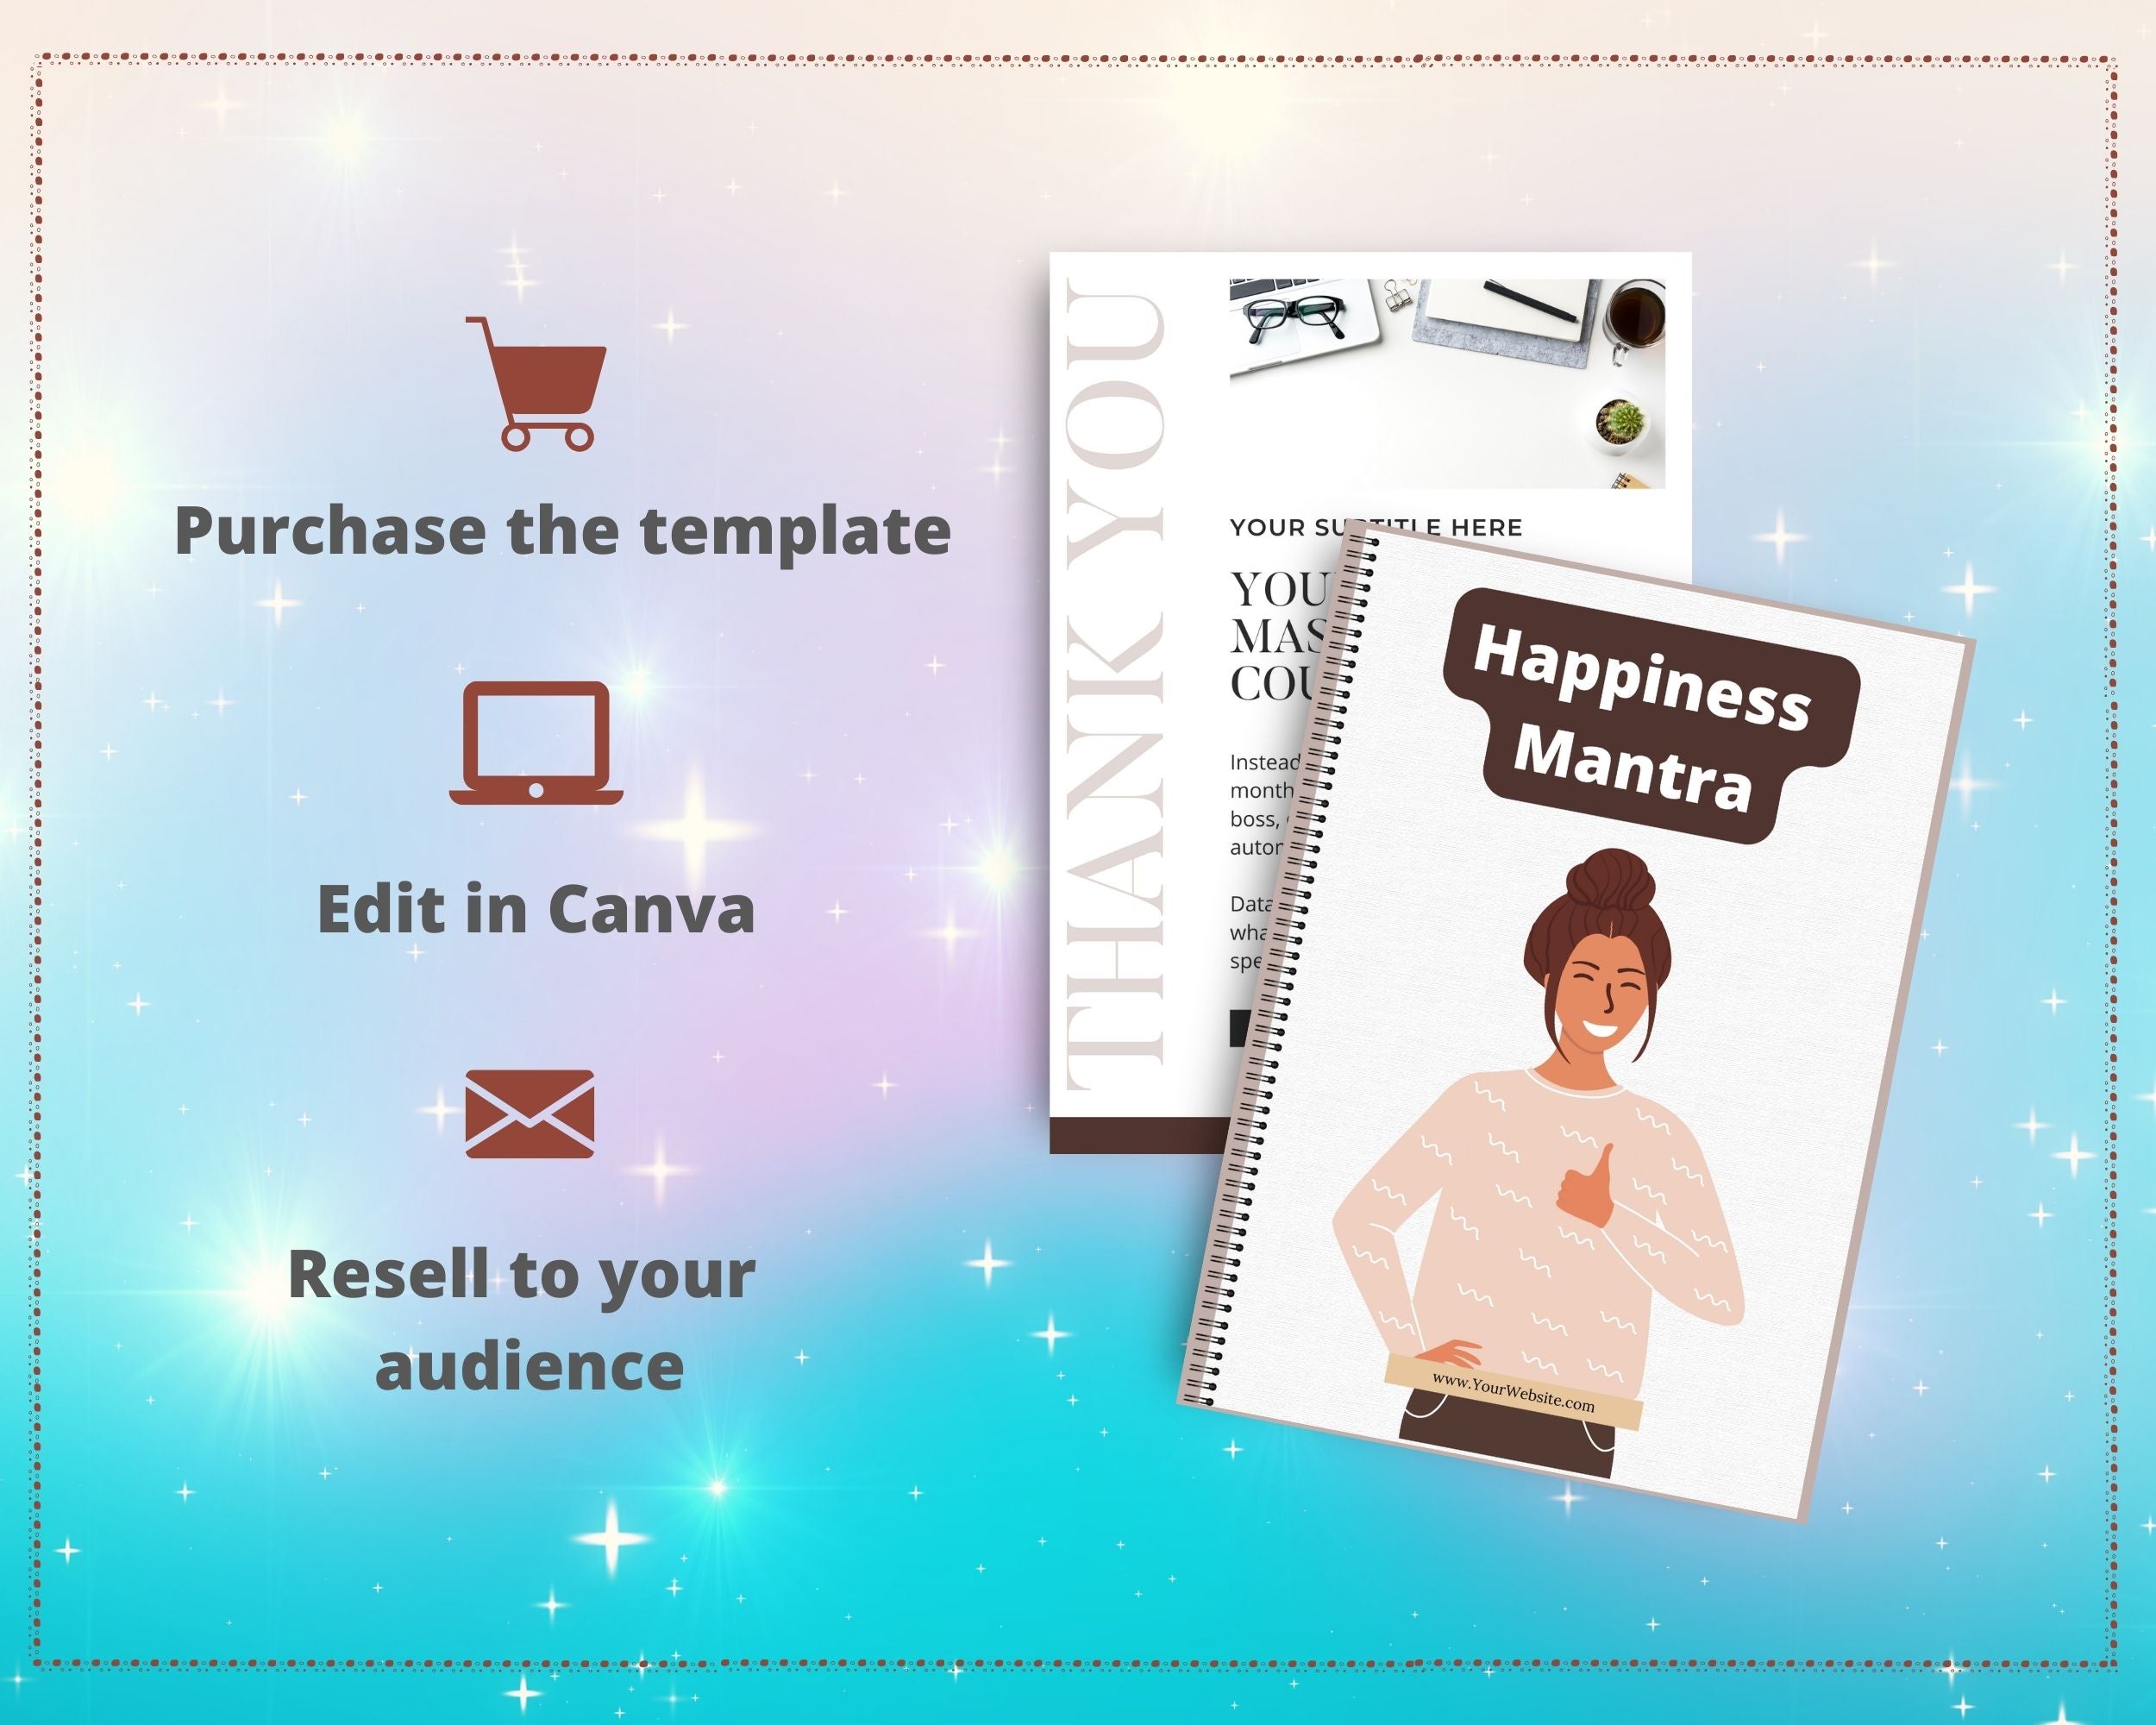 Editable Happiness Mantra Ebook | Done-for-You Ebook in Canva | Rebrandable and Resizable Canva Template